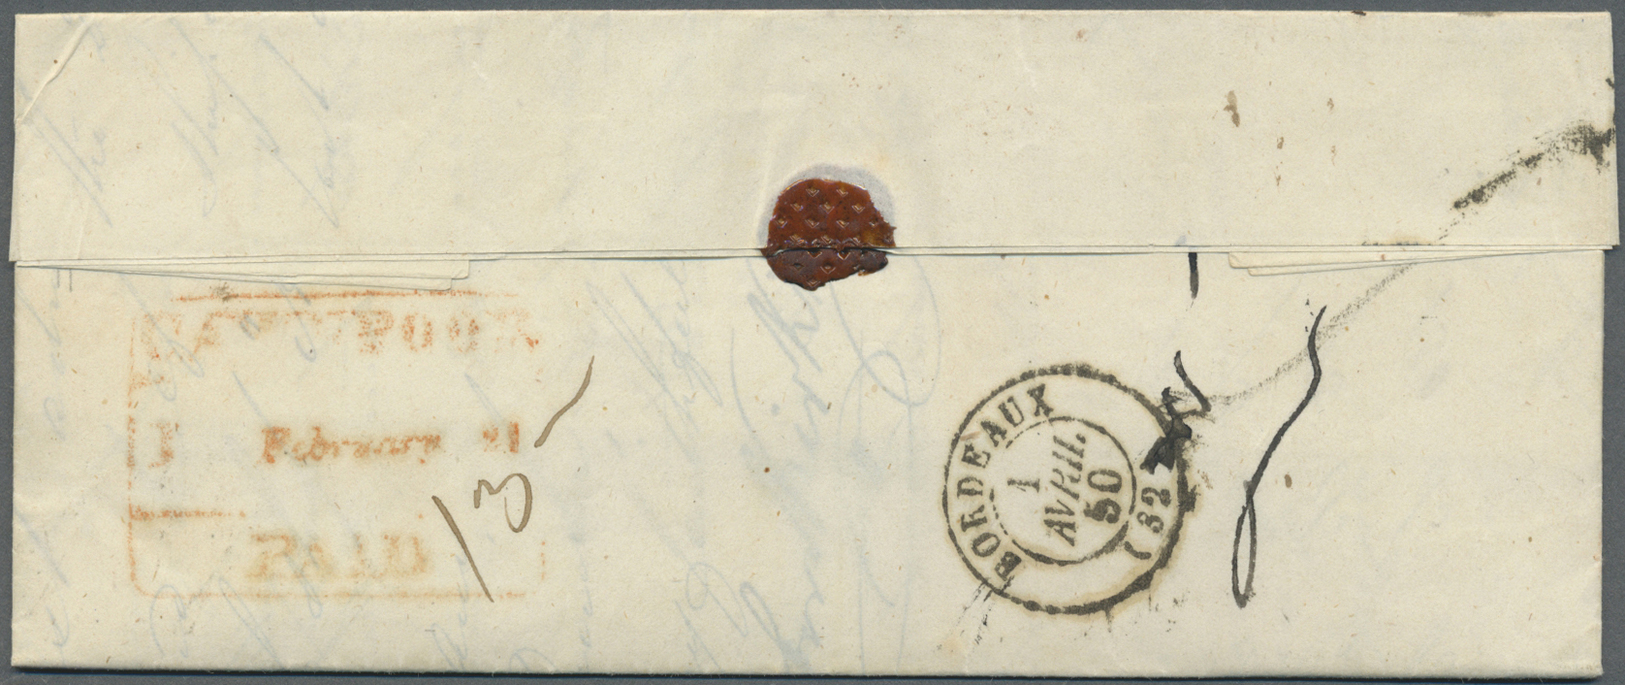 Br Indien - Vorphilatelie: 1827-1850: Four letters to Bordeaux, FRANCE, with 1) 1827 letter from Calcutta bearing "COLON